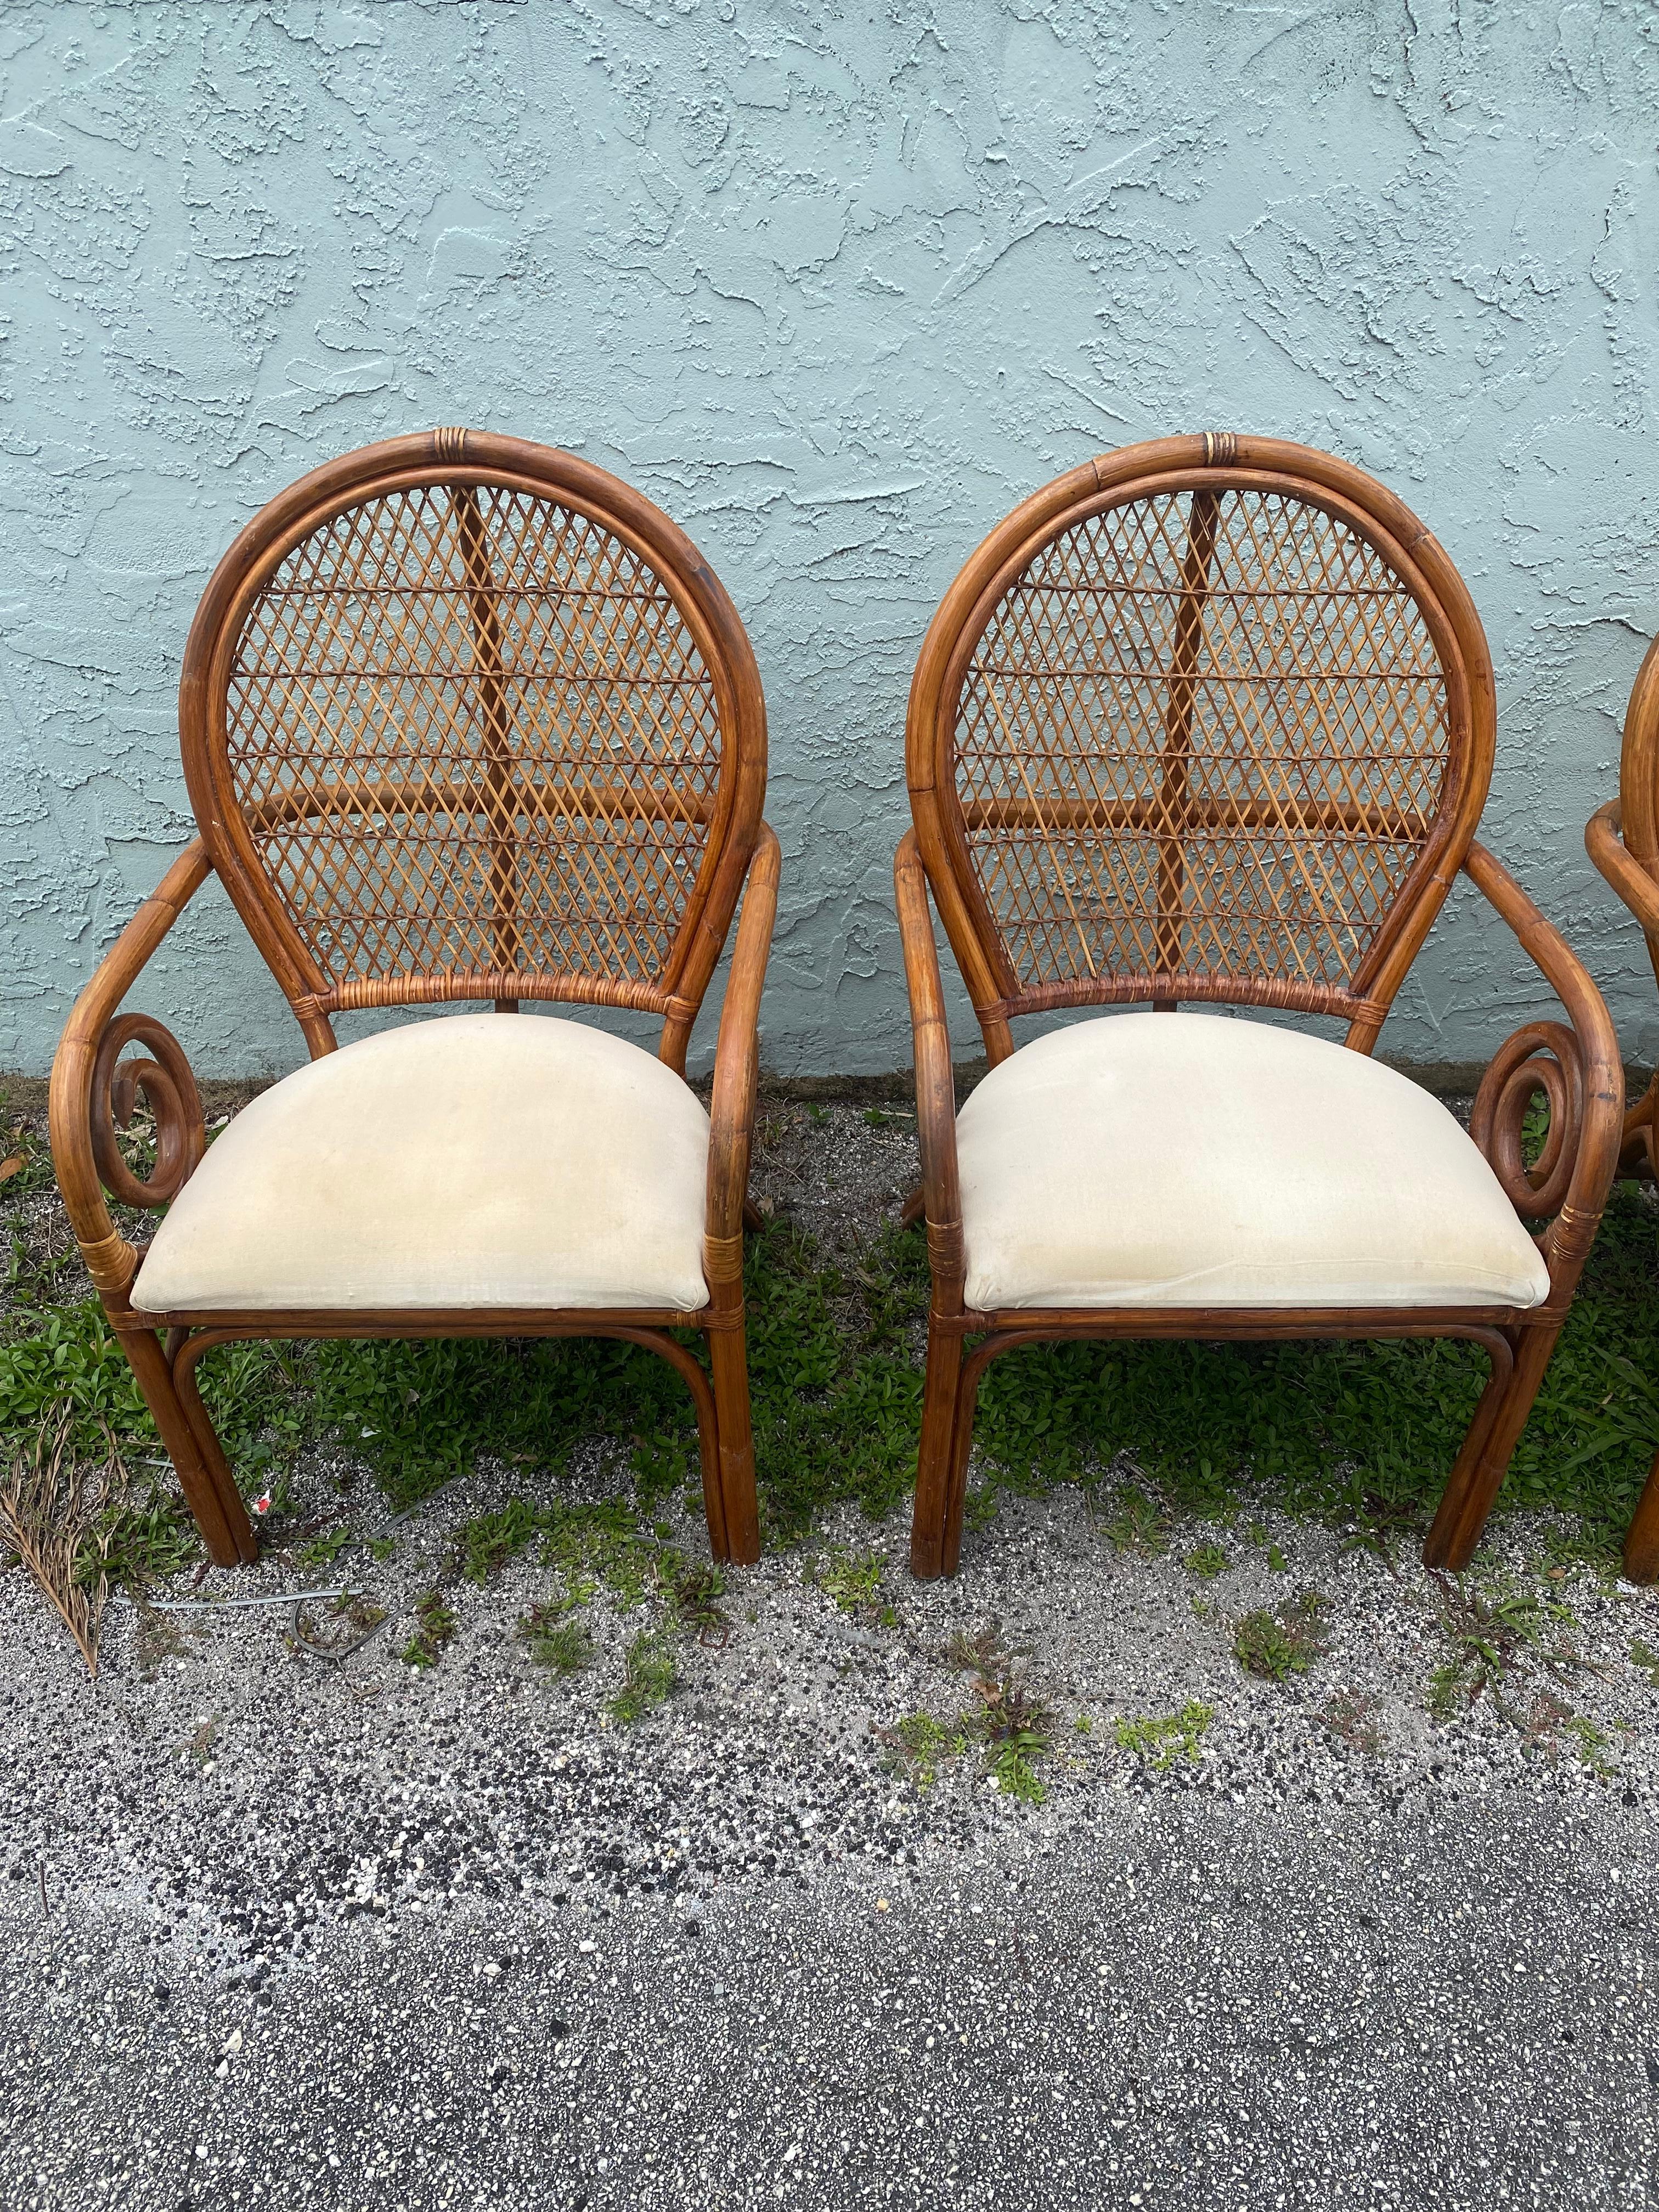 1970s Rattan Peacock Scroll Arm Sculptural Dining Side Chairs In Good Condition For Sale In Fort Lauderdale, FL